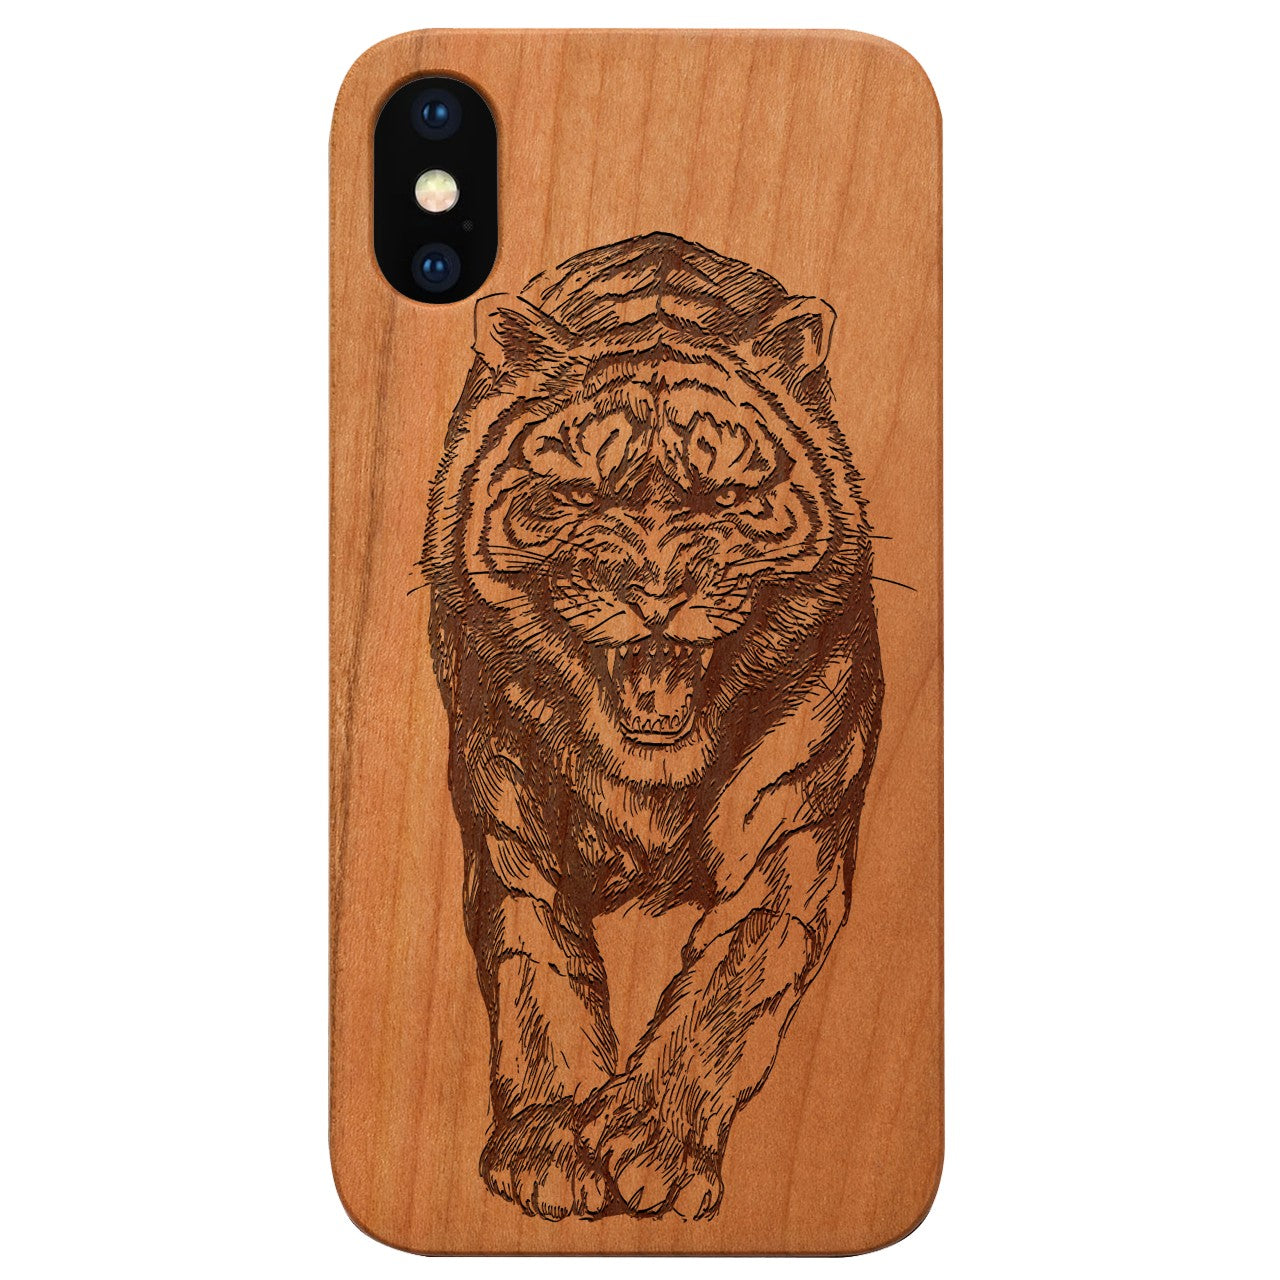  Angry Tiger - Engraved - Wooden Phone Case - IPhone 13 Models